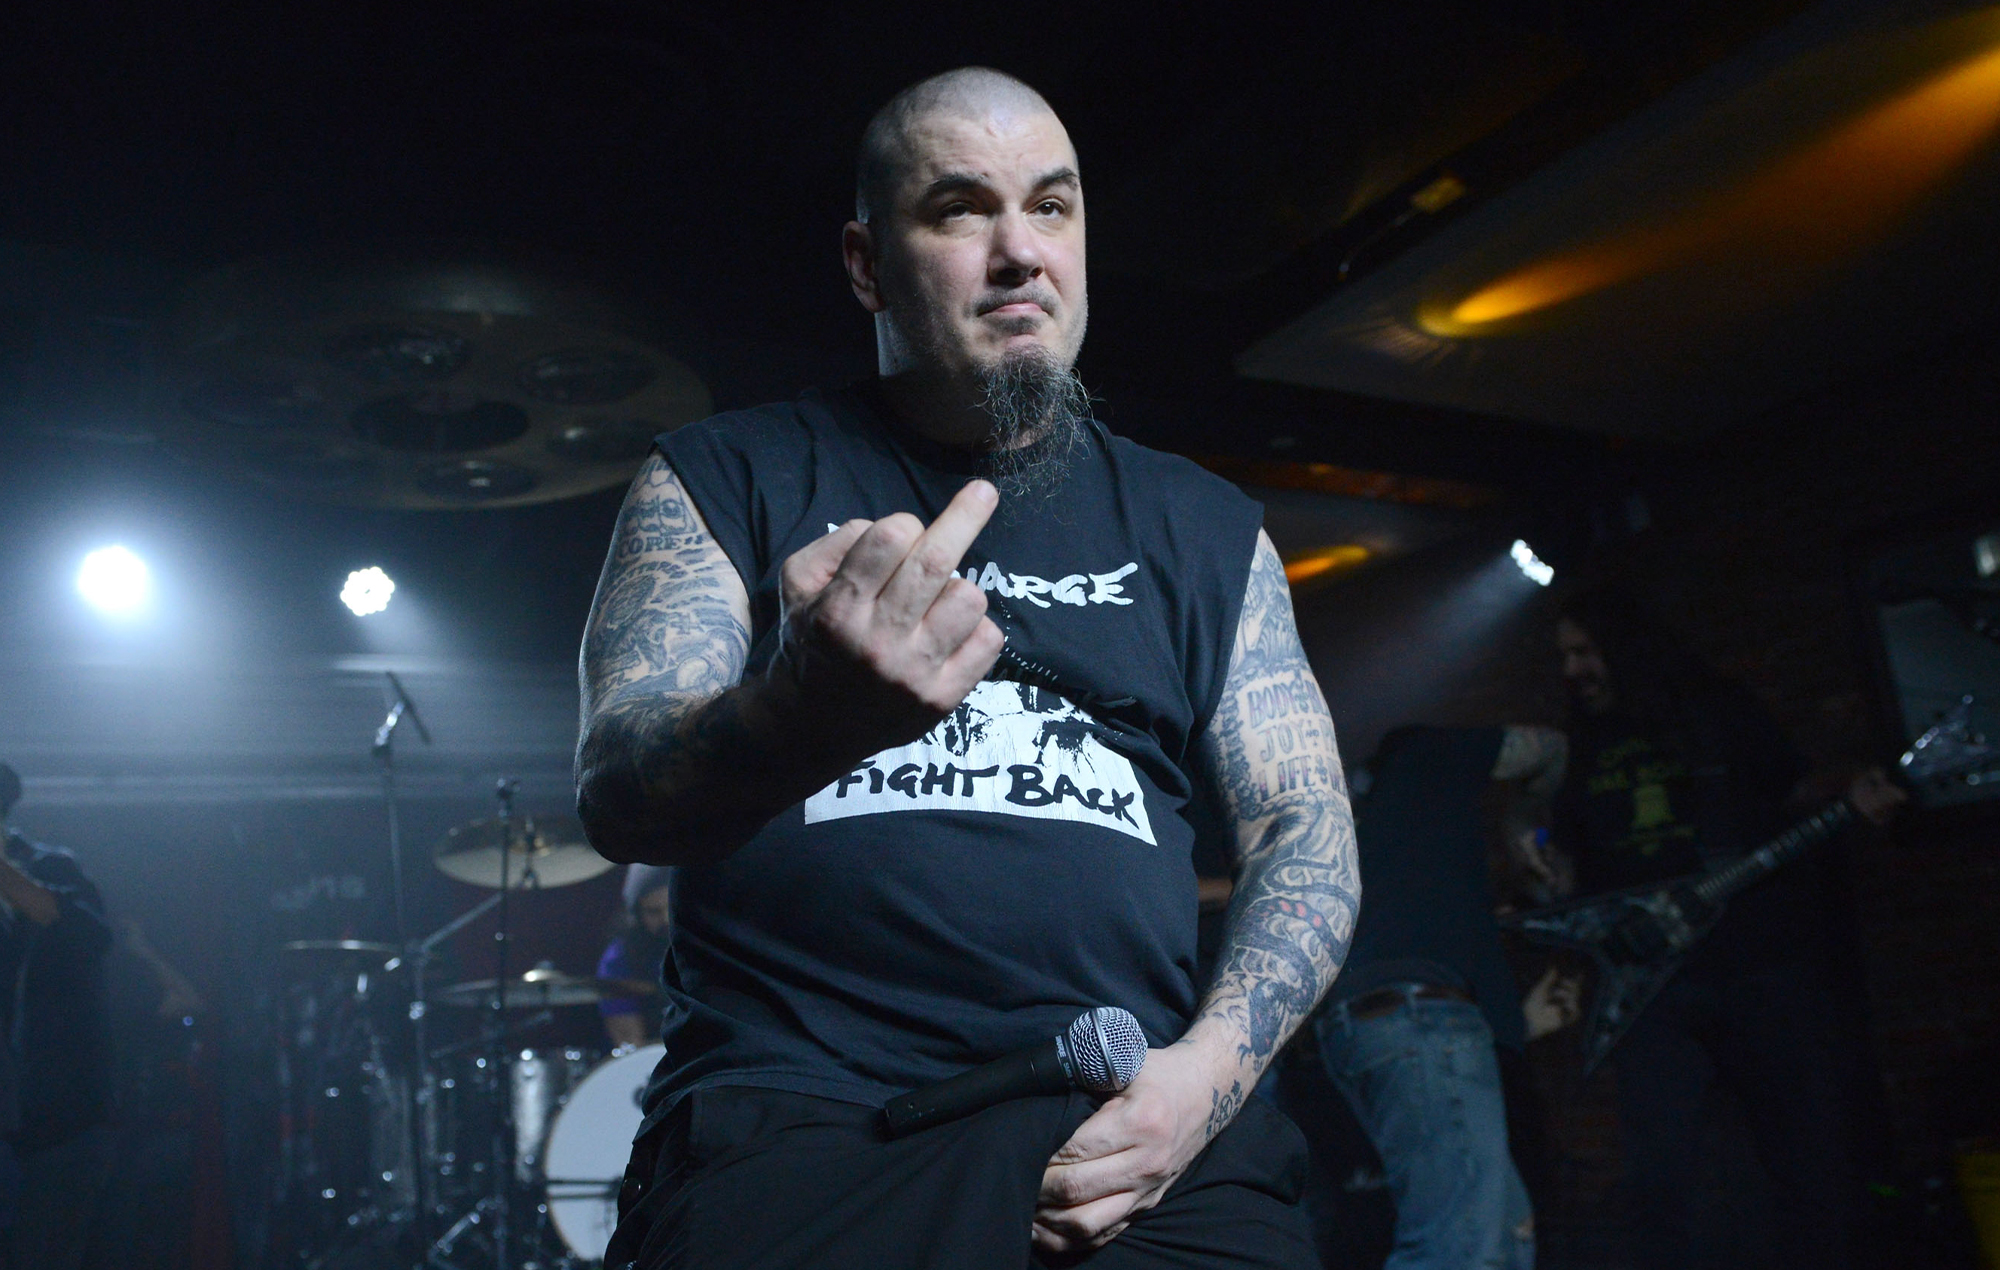 Phil Anselmo of Pantera. Credit: Scott Dudelson via Getty Images